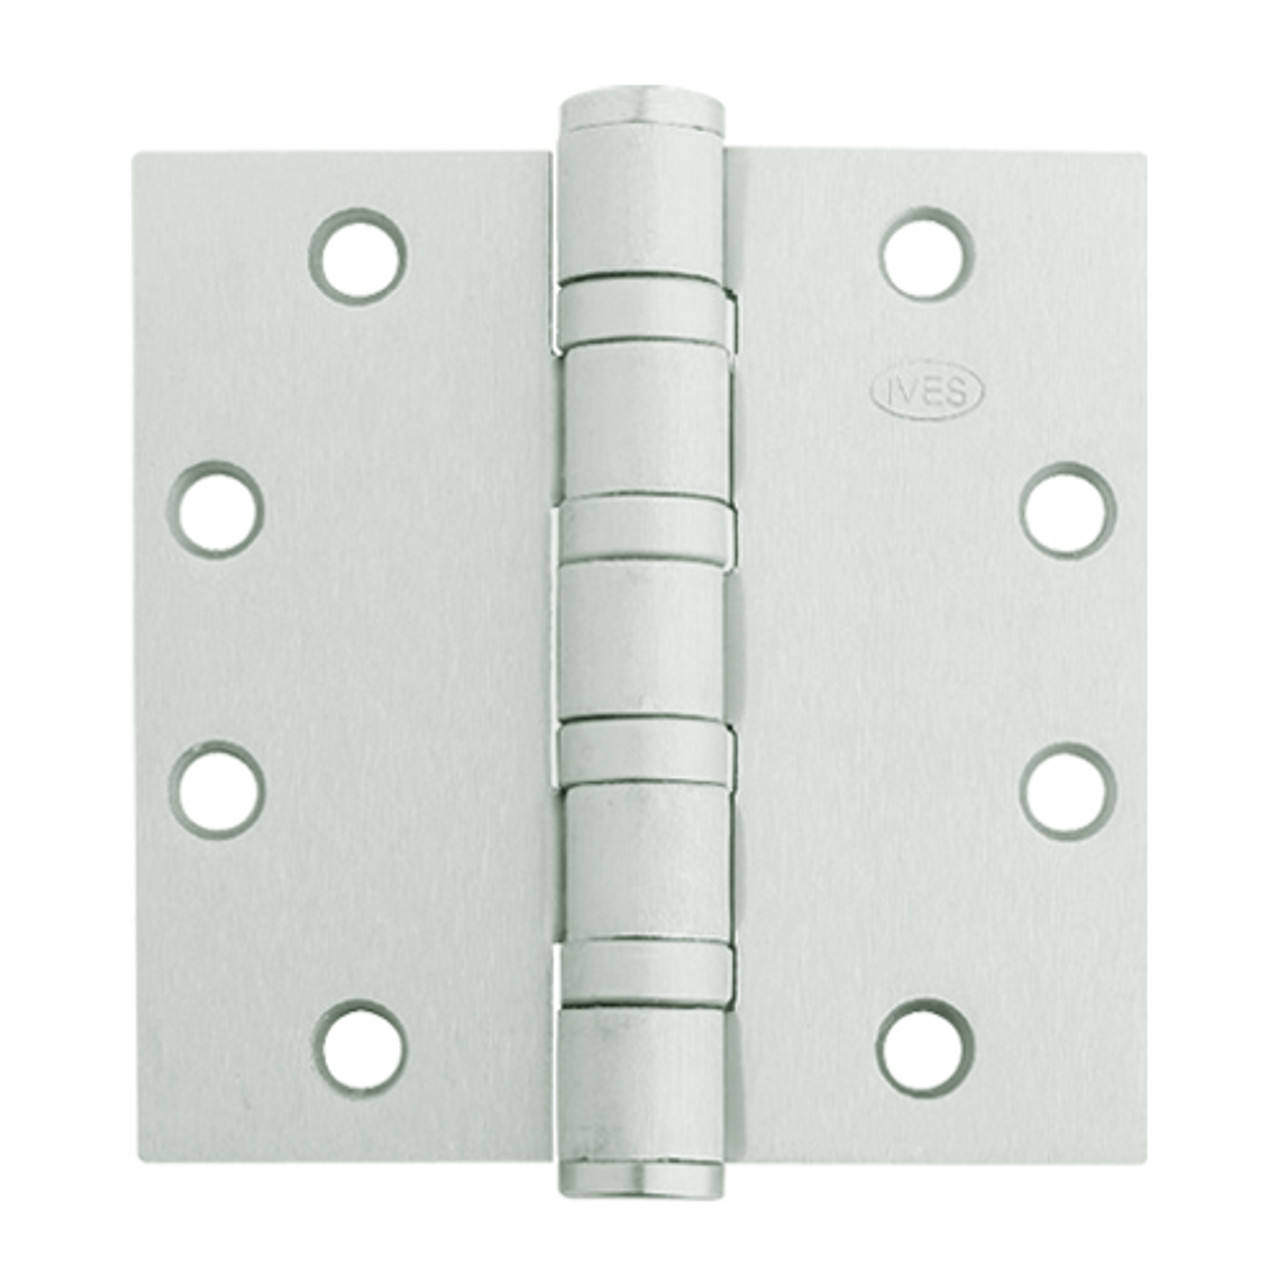 5BB1HW-5x4-5-646-TW4 IVES 5 Knuckle Ball Bearing Full Mortise Hinge with Electric Thru-Wire in Satin Nickel Plated